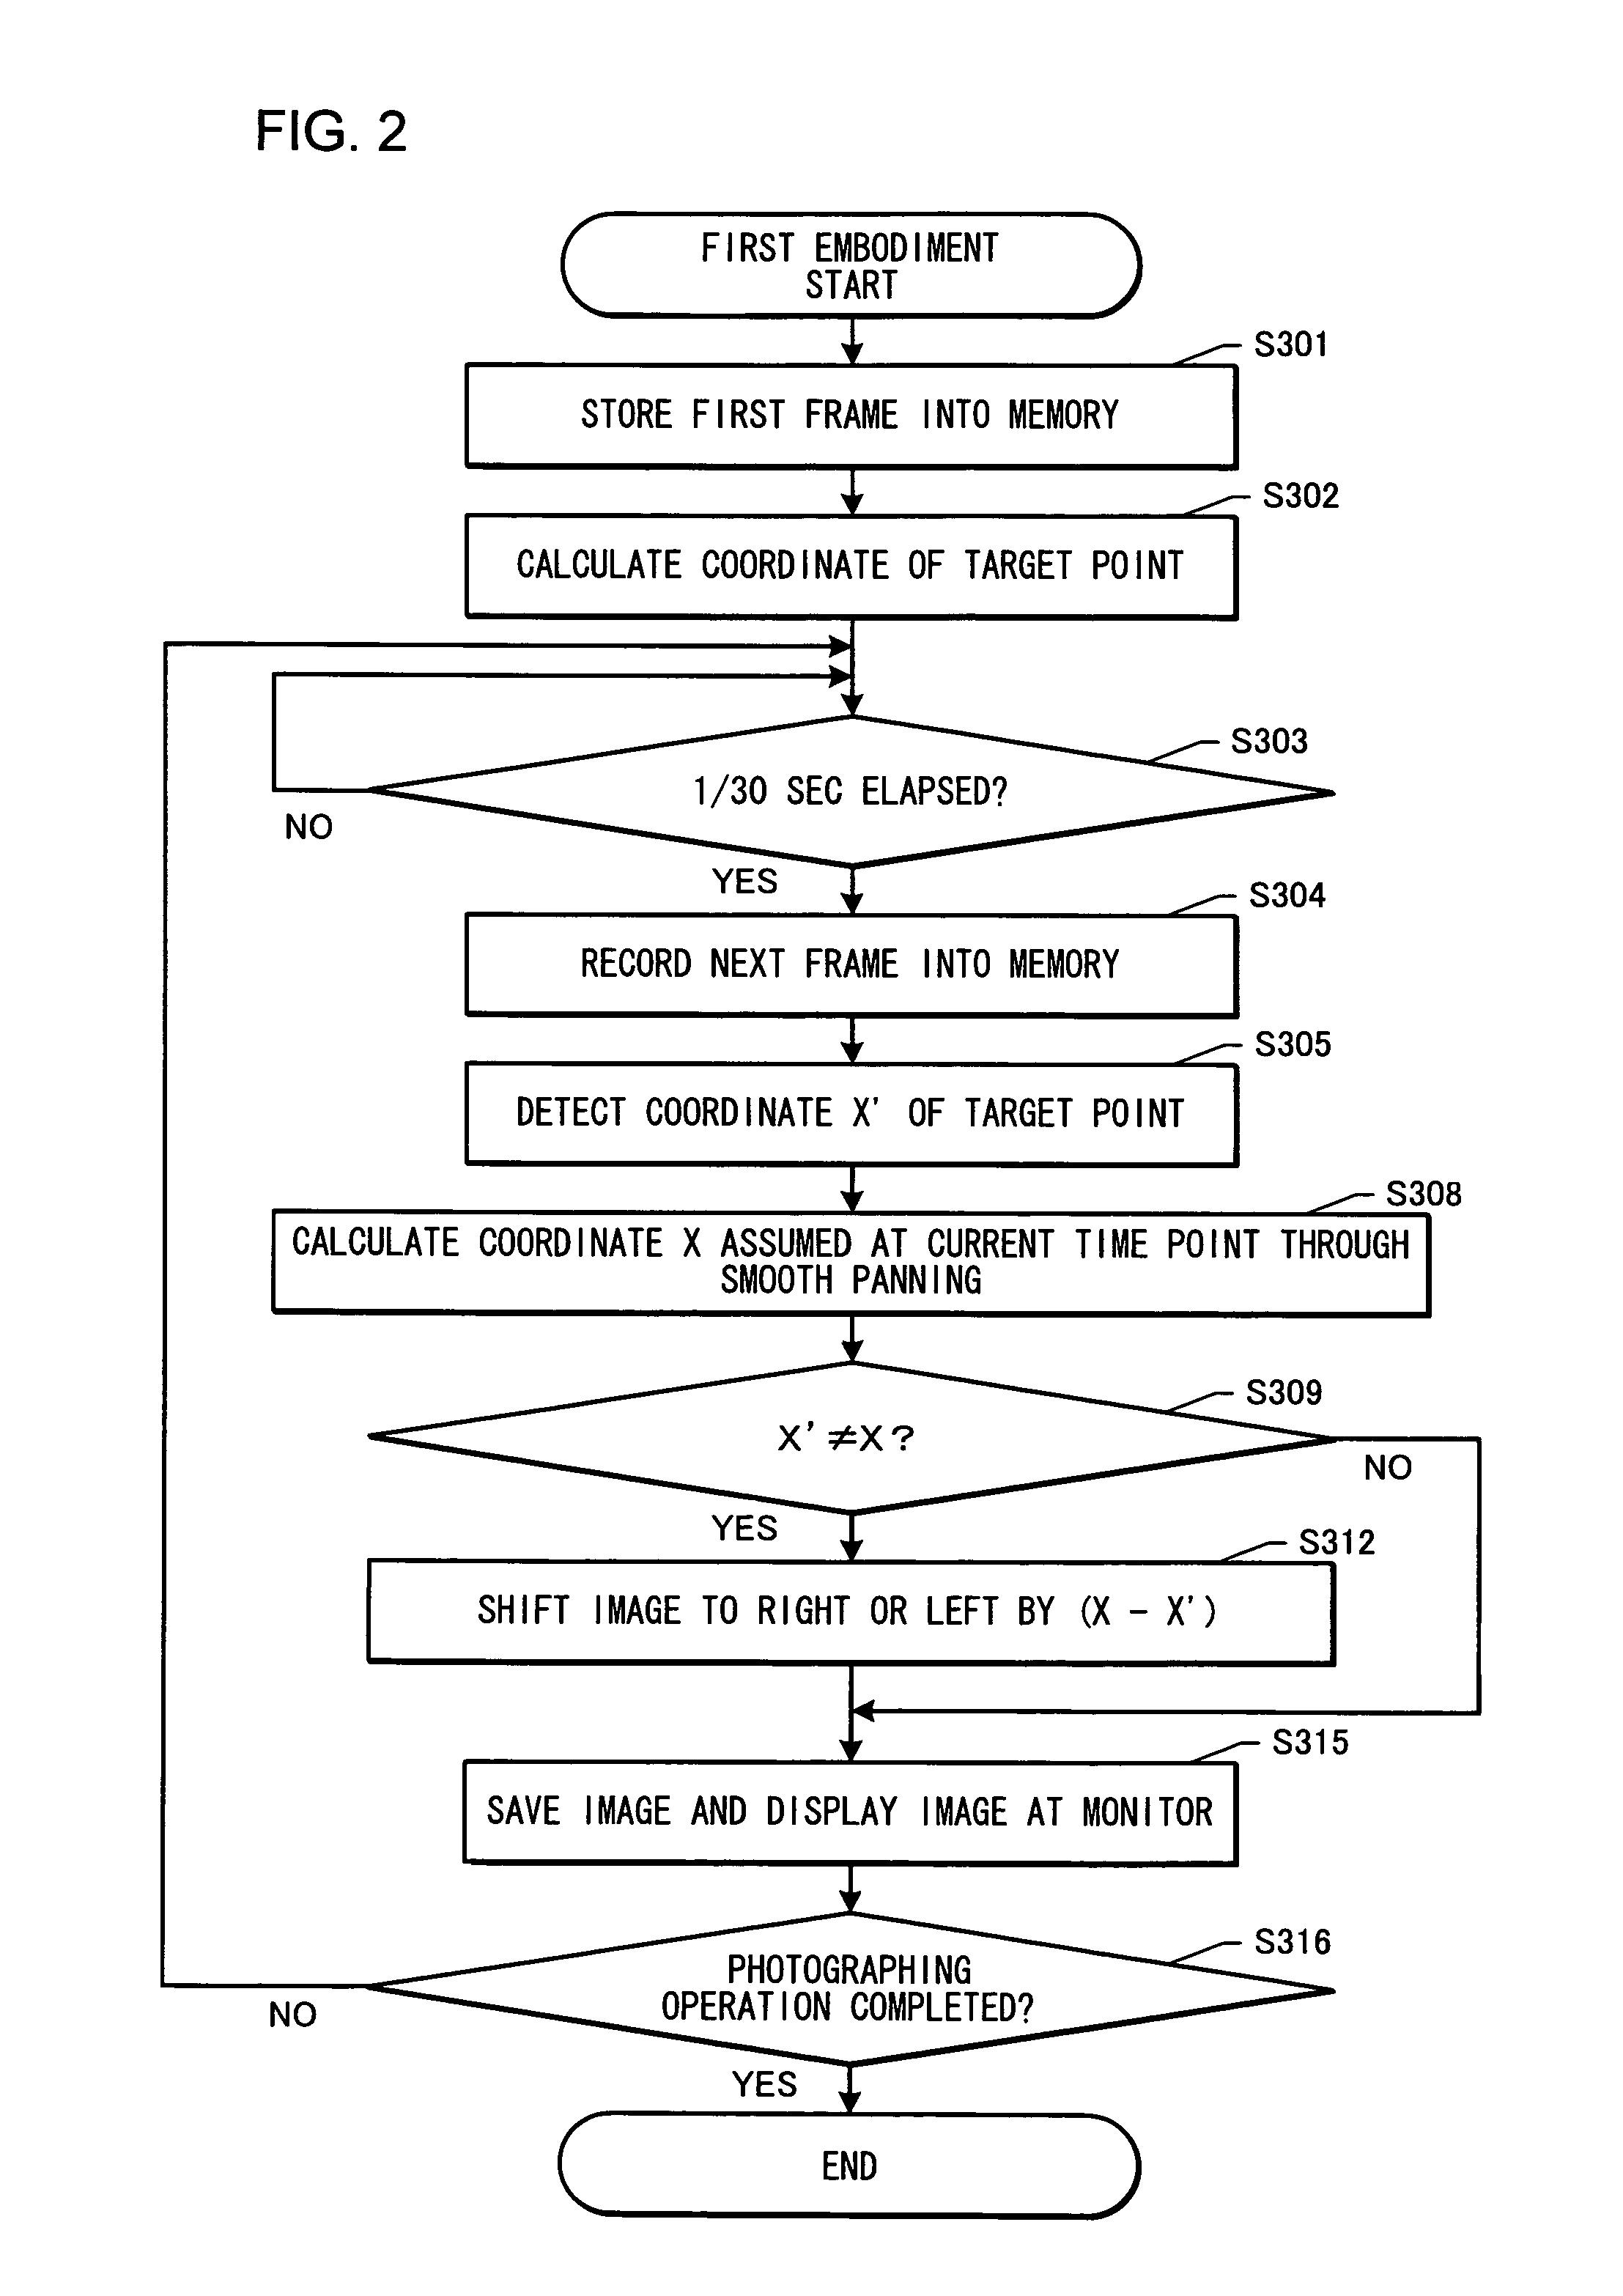 Camera enabling panning and moving picture editing program product